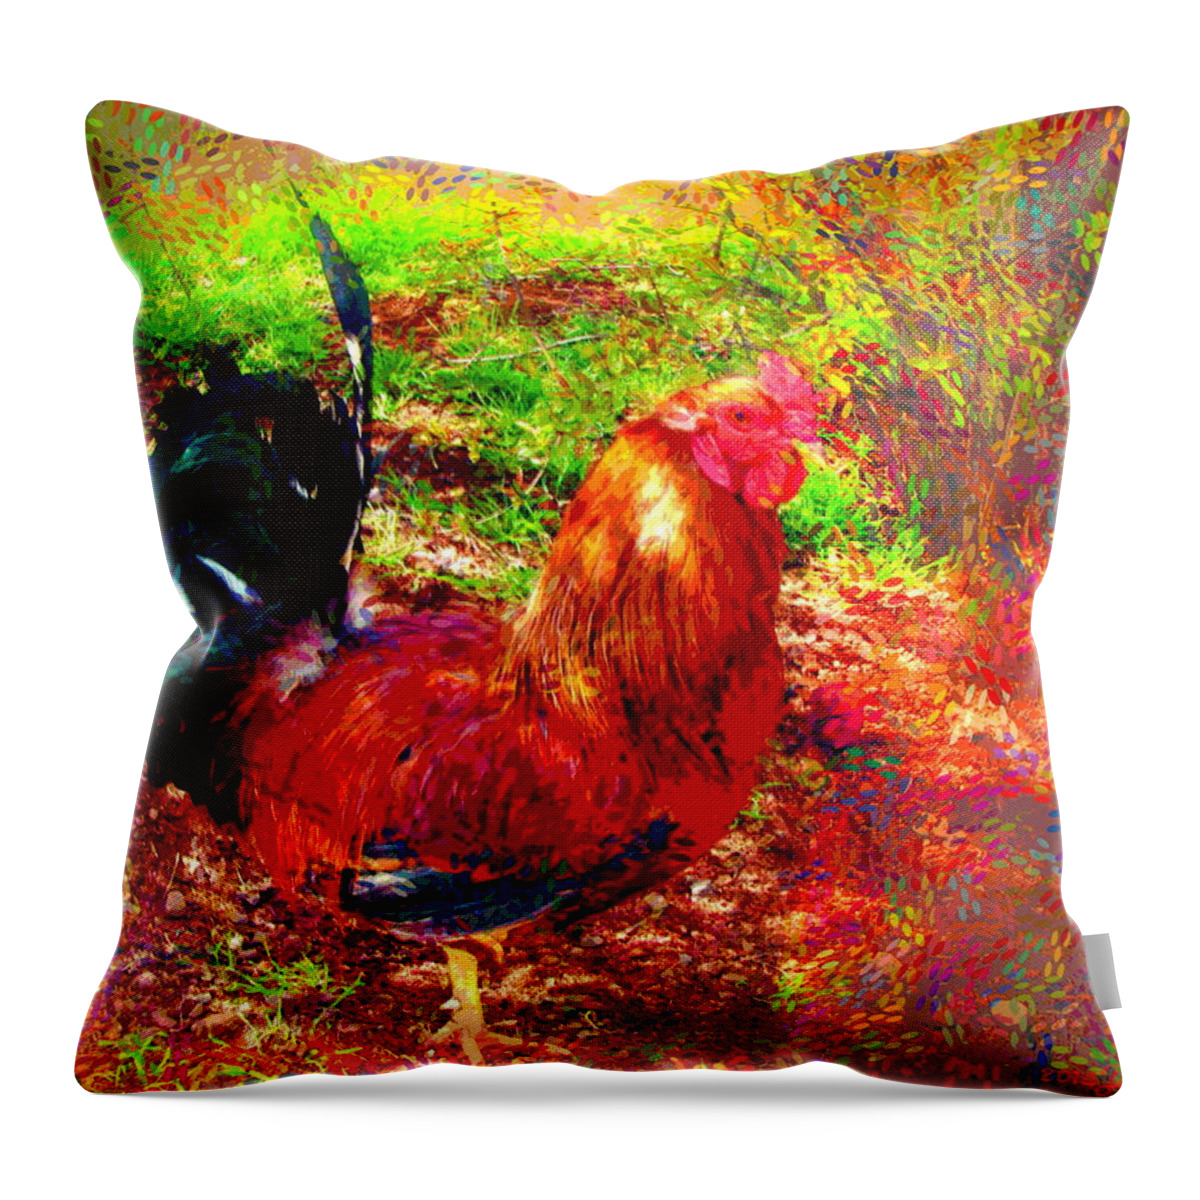 Rooster Throw Pillow featuring the photograph Strutting In Living Color by Joyce Dickens